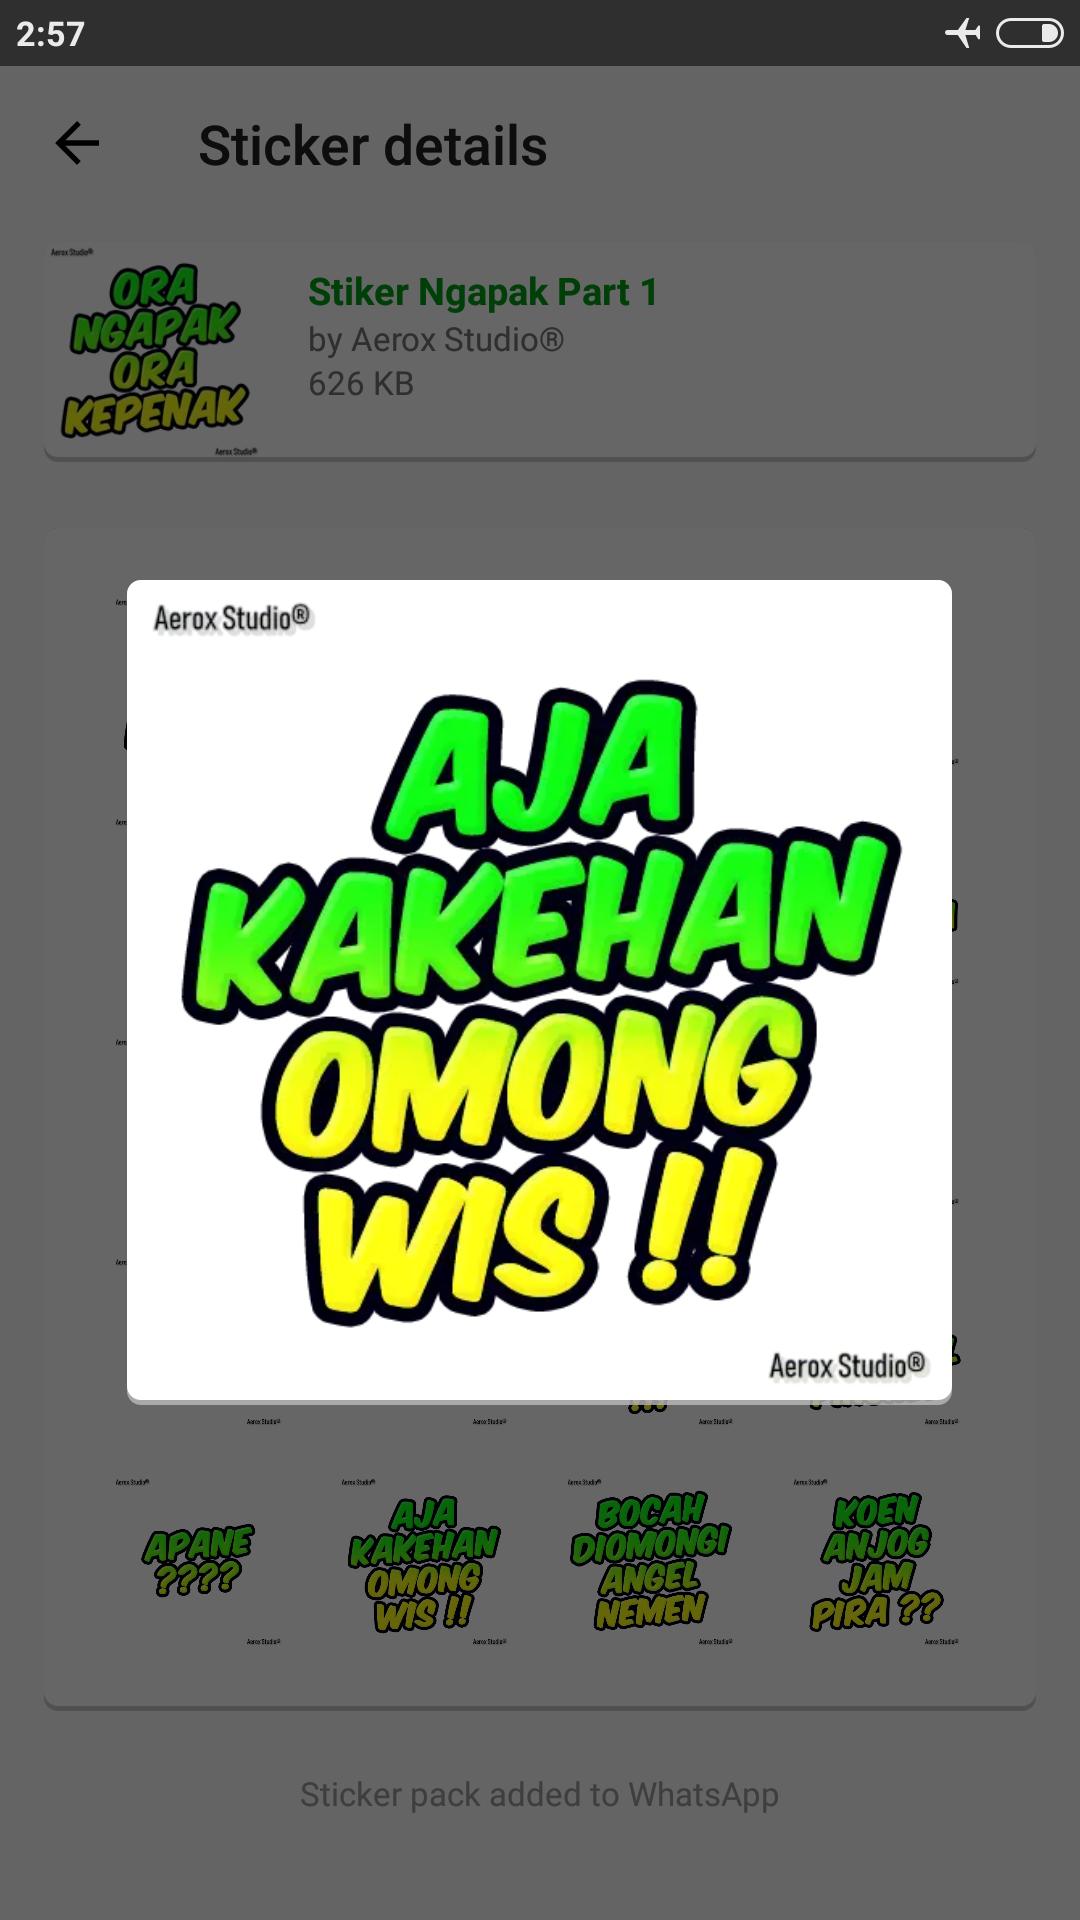 Stiker Jawa Ngapak Lucu Wastickerapps For Android Apk Download